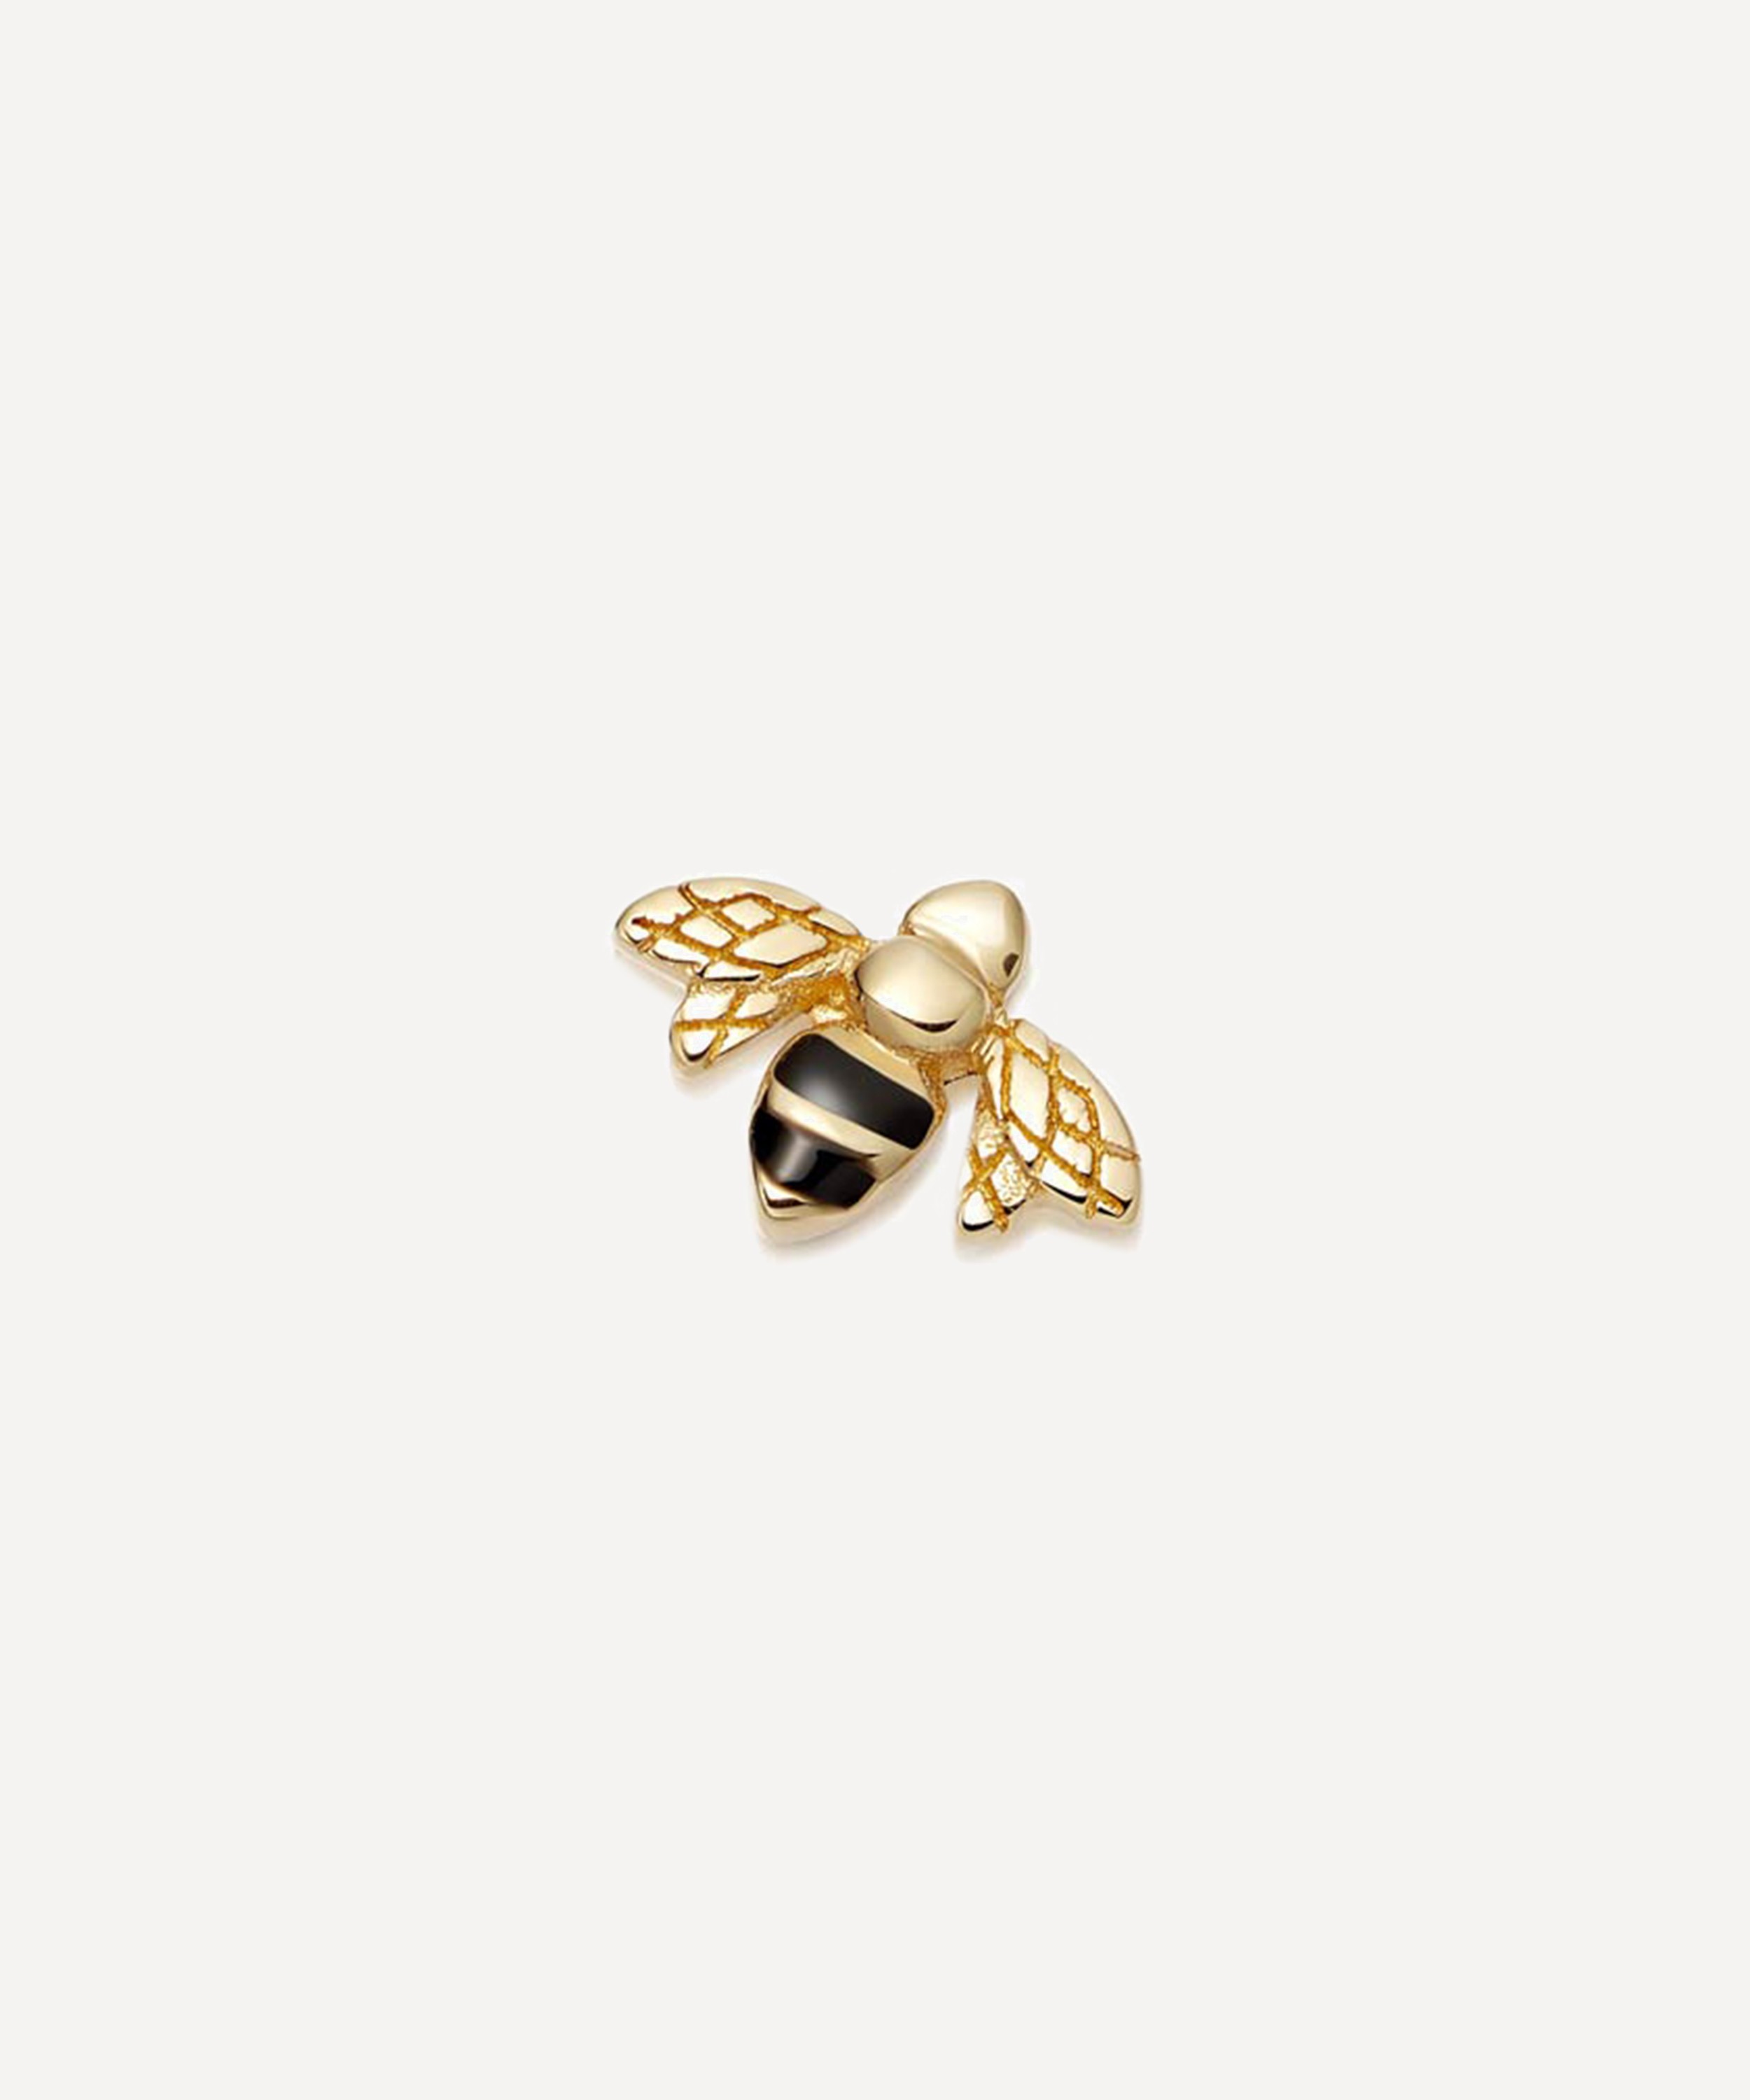 Loquet London - 18ct Gold Bee Charm